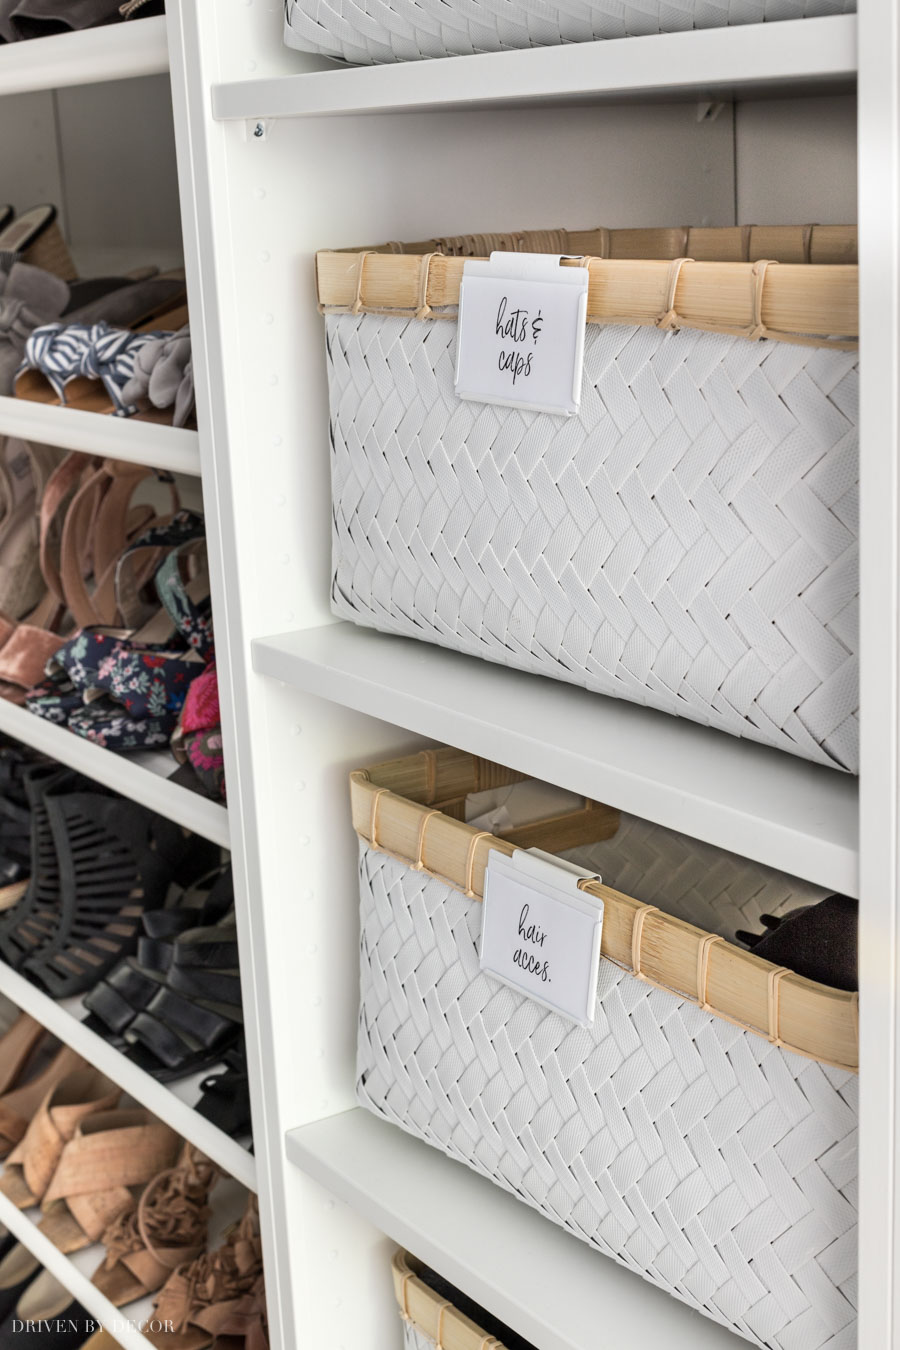 IKEA PAX Closet System Review! - Driven by Decor